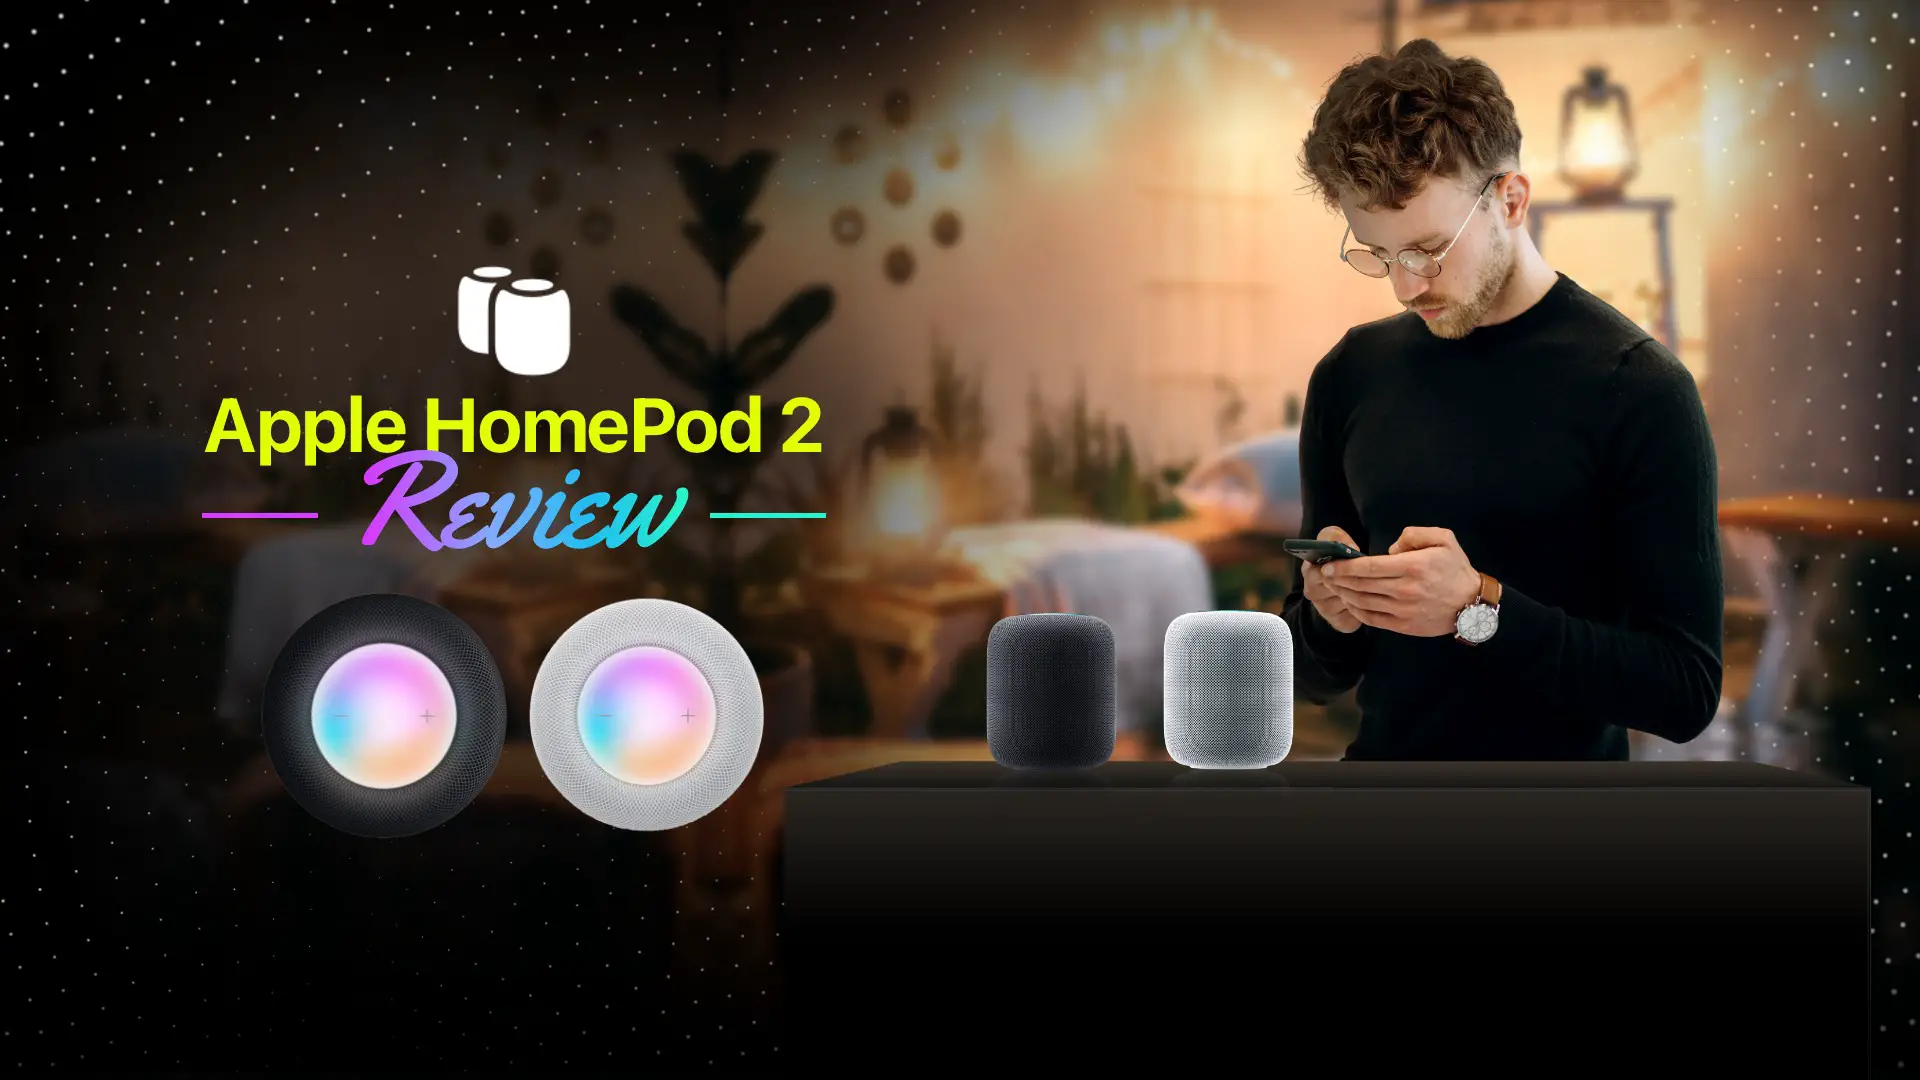 Apple HomePod 2 Review – Everything You Need to Know